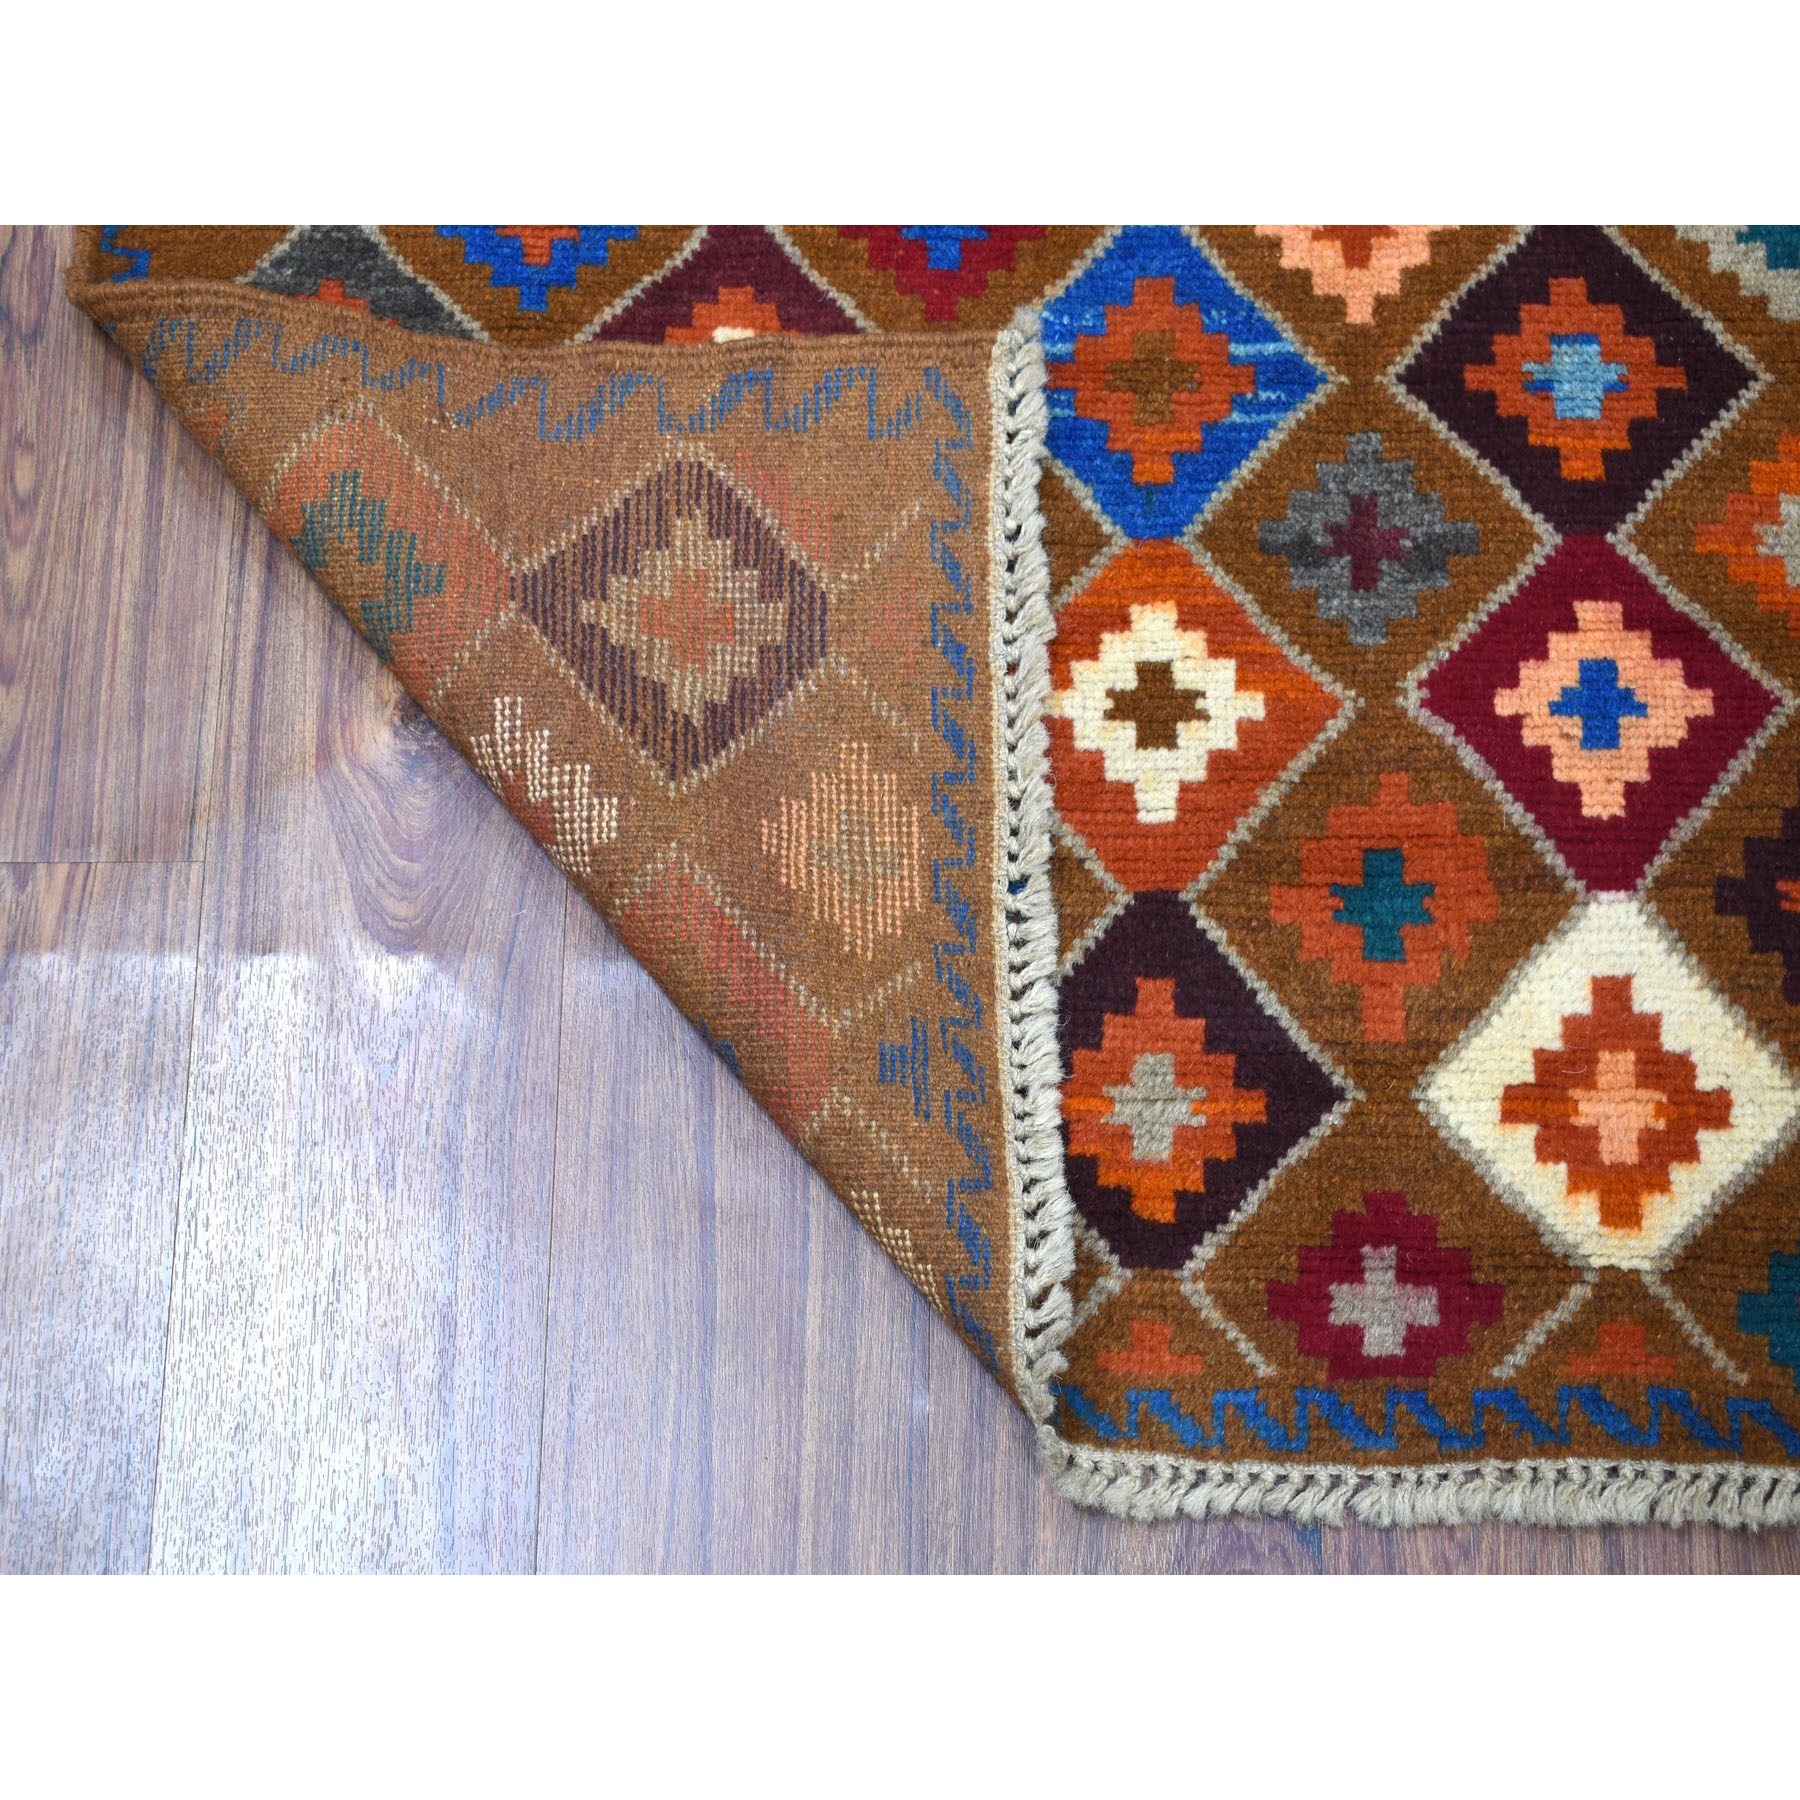 3'5"x4'10" Brown Geometric Design Colorful Afghan Baluch Pure Wool Hand Woven Oriental Rug 